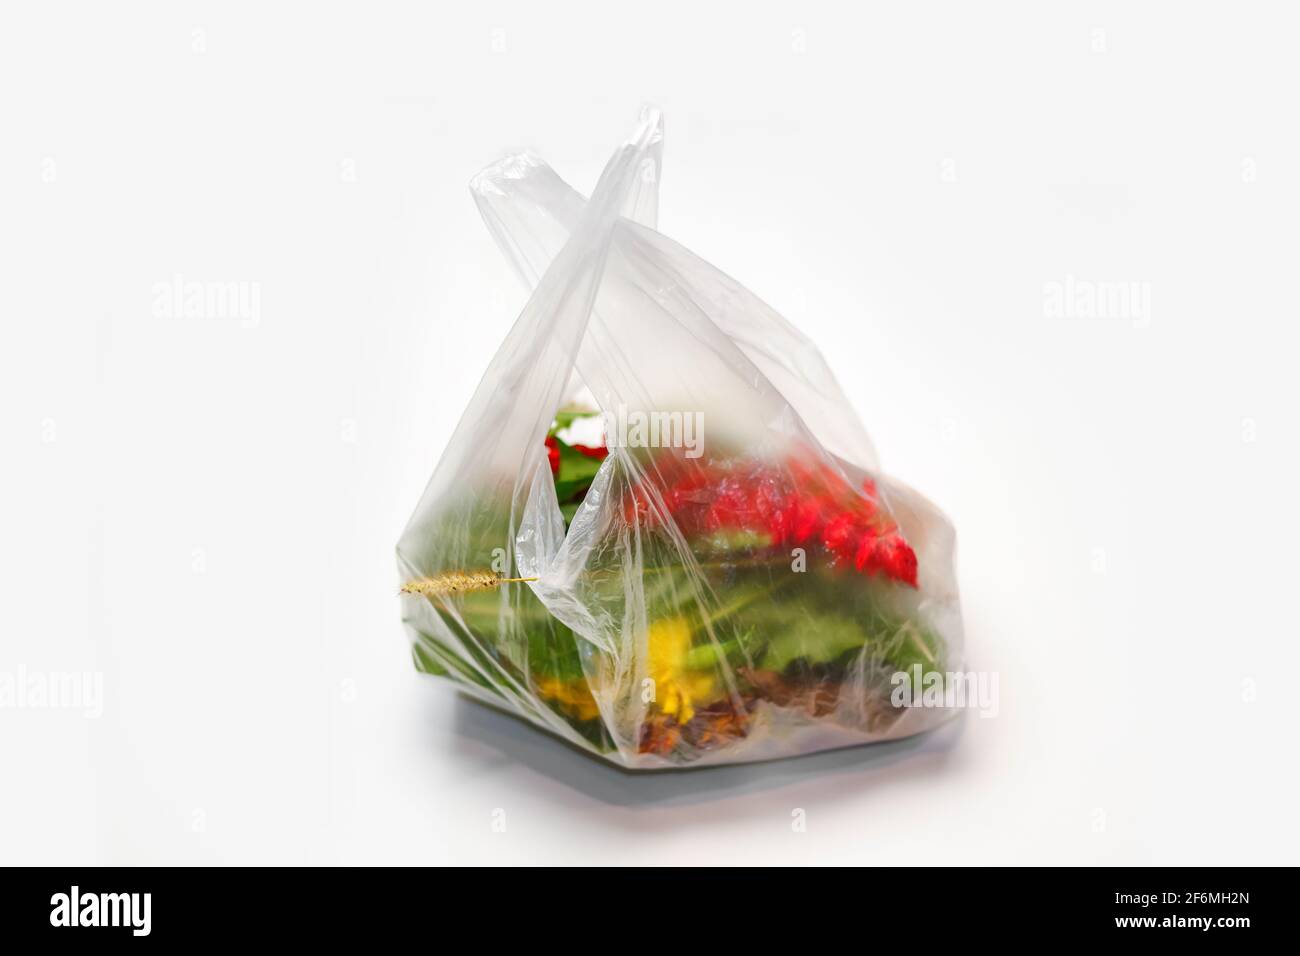 DEFOCUS. Plastic plant. Red and green plants flowers in a plastic bag on a white background. A dry blade of grass sticks out. Ecological problems. Out Stock Photo